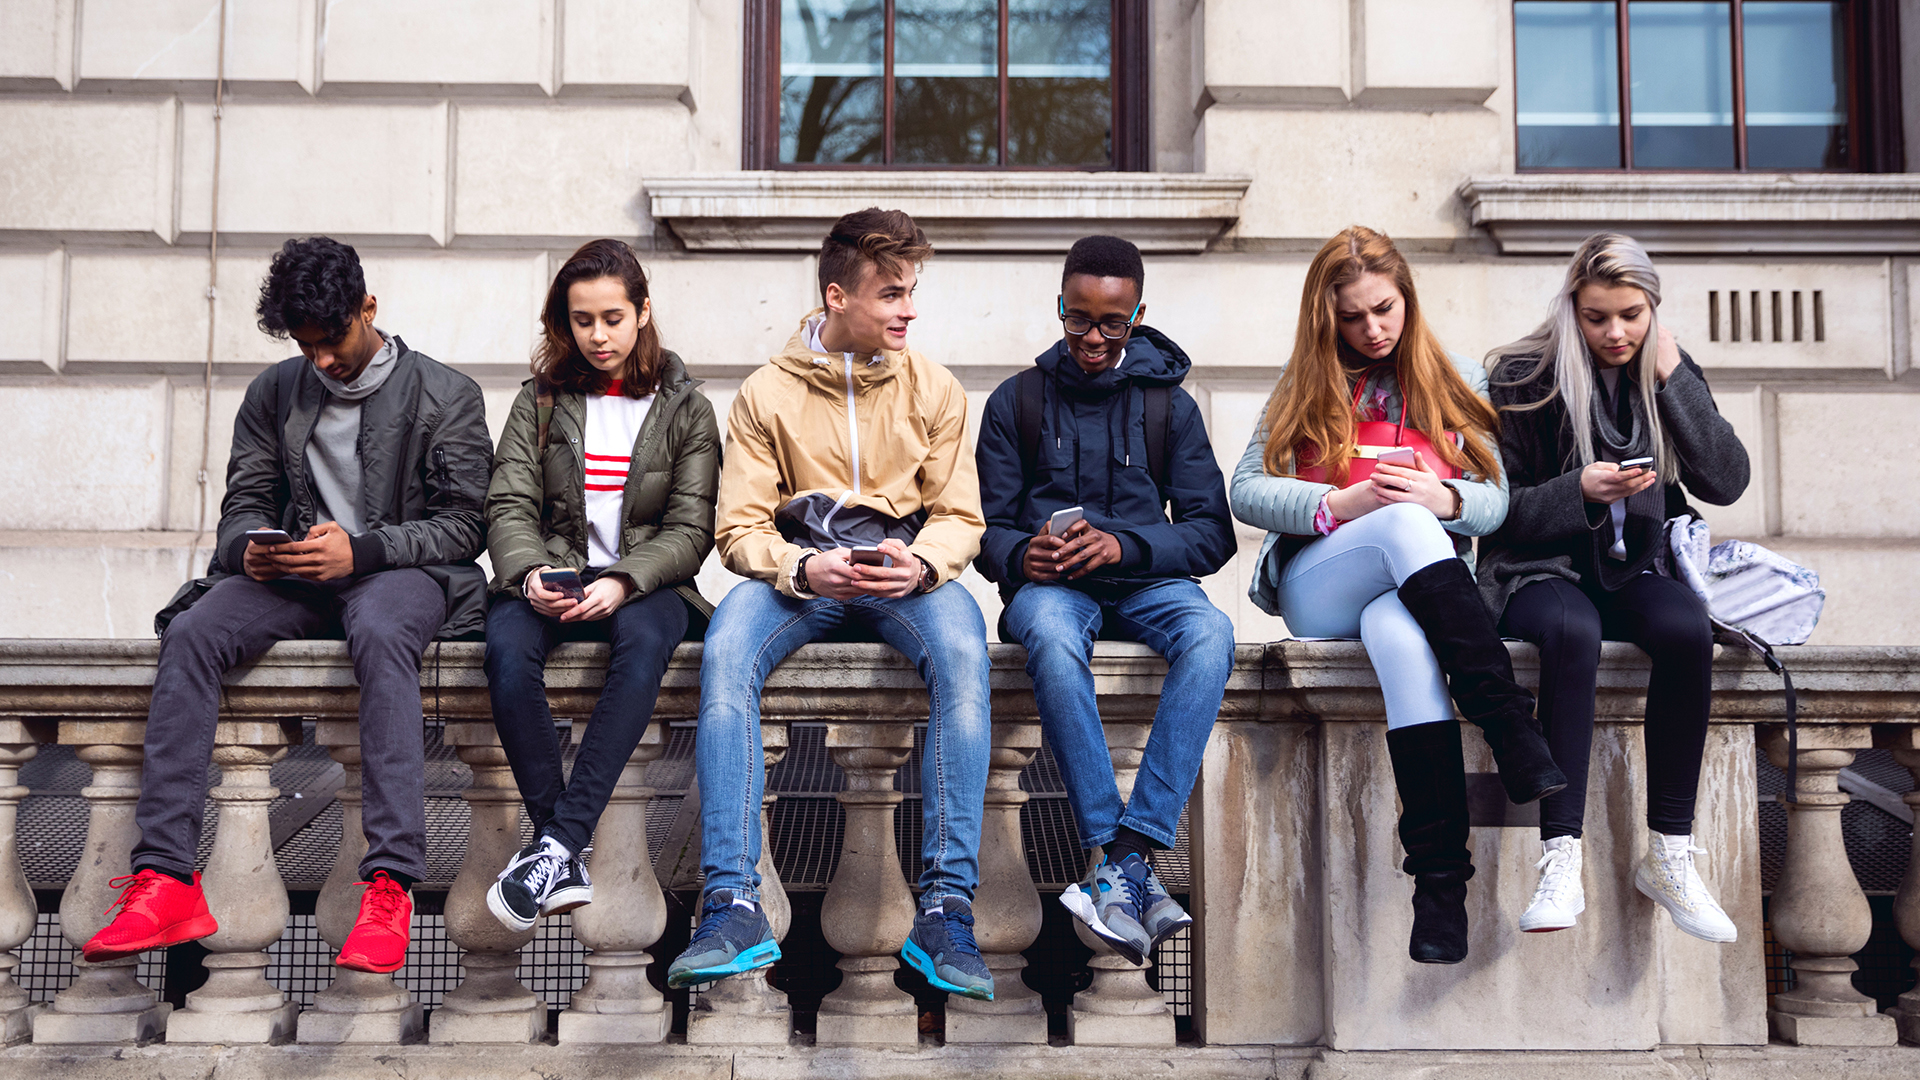 The influence of social media use on well-being in adolescence